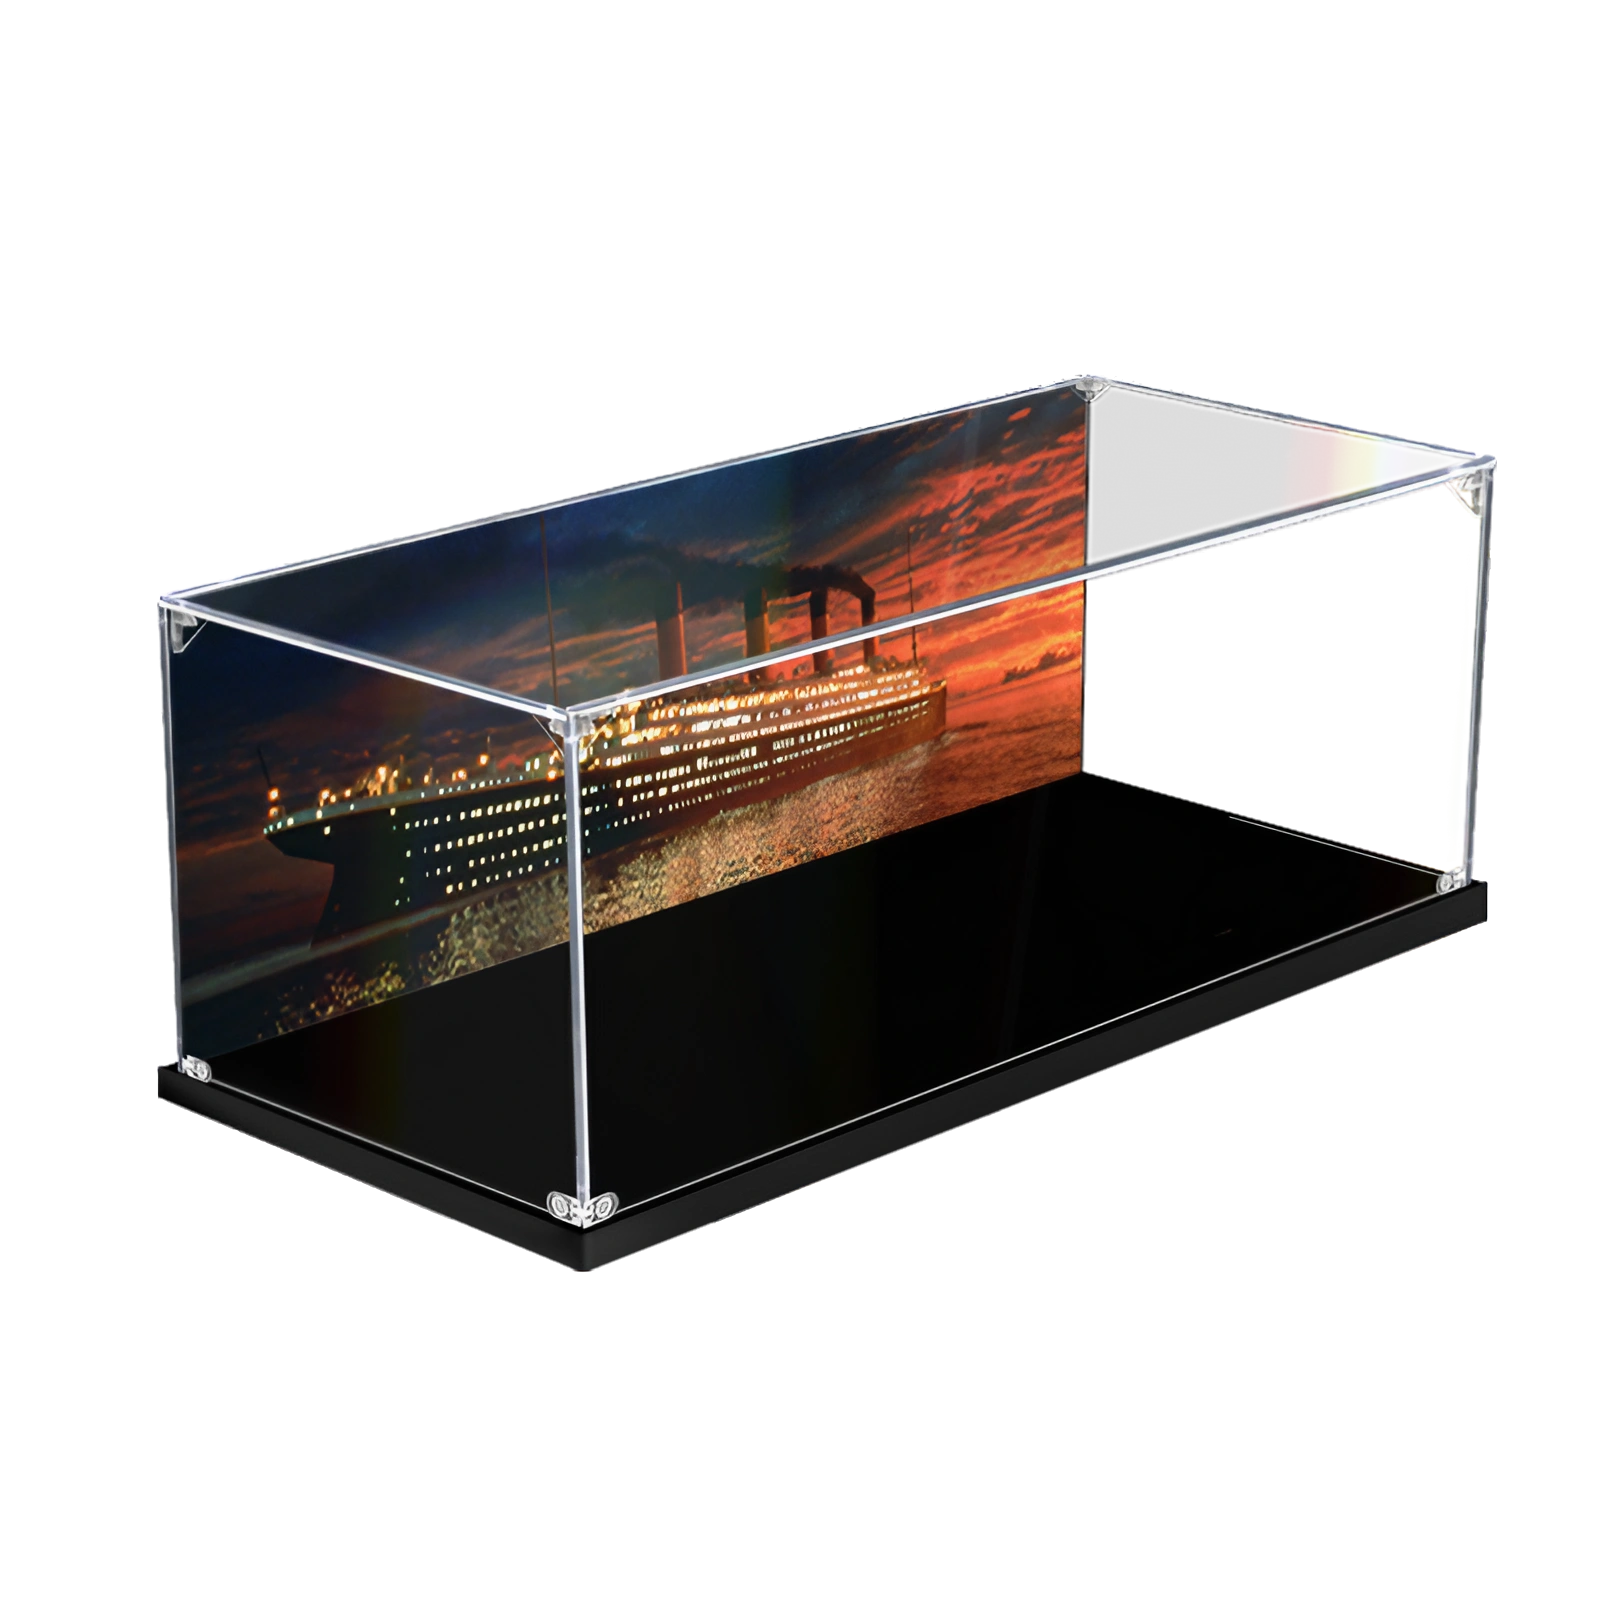 Illuminated glass cases, base with wheels, displays crystal, to shop